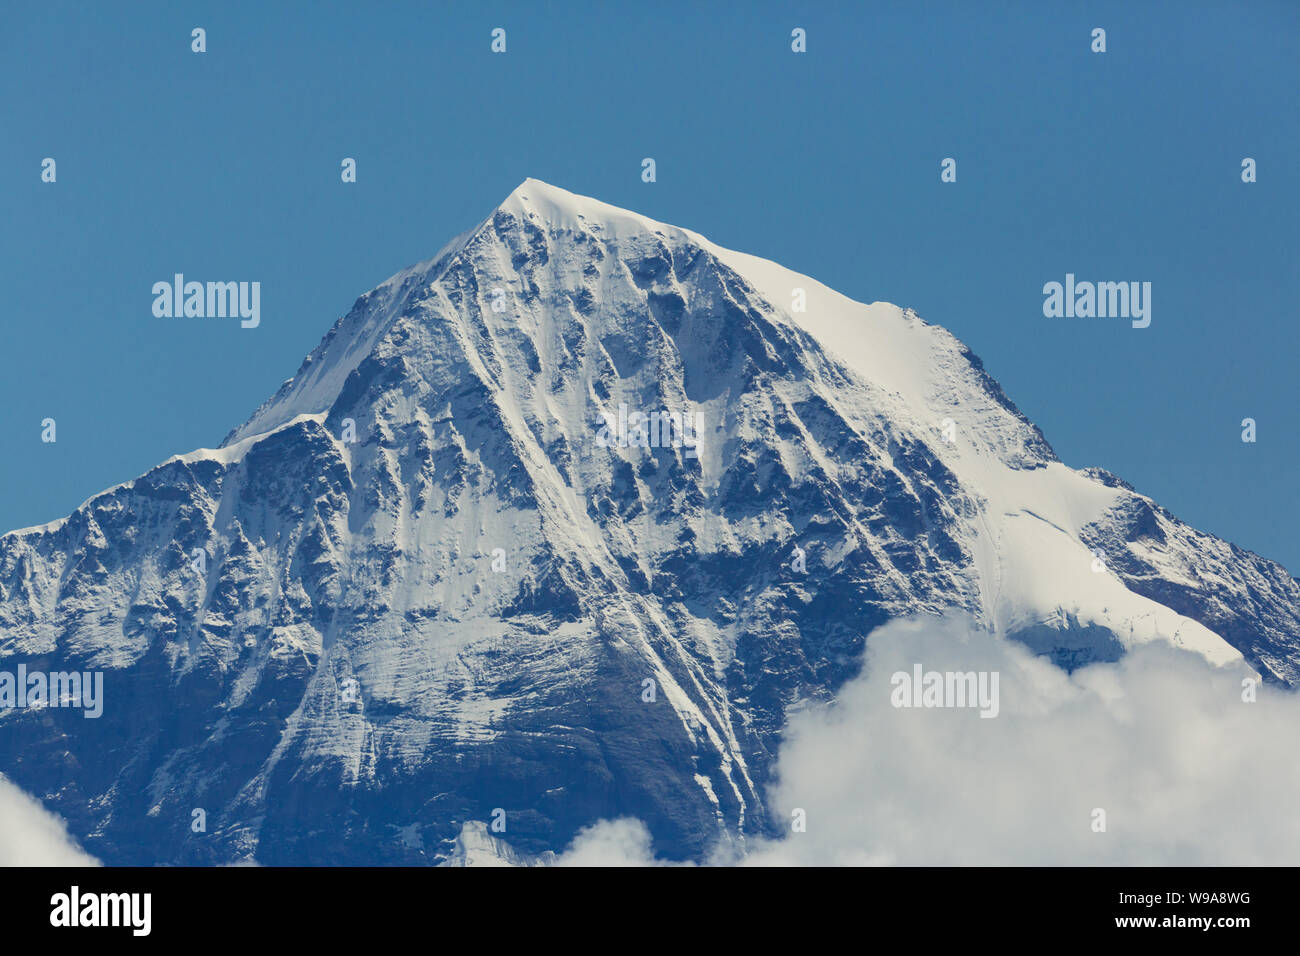 snowcapped Moench mountain summit in Switzerland, blue sky Stock Photo